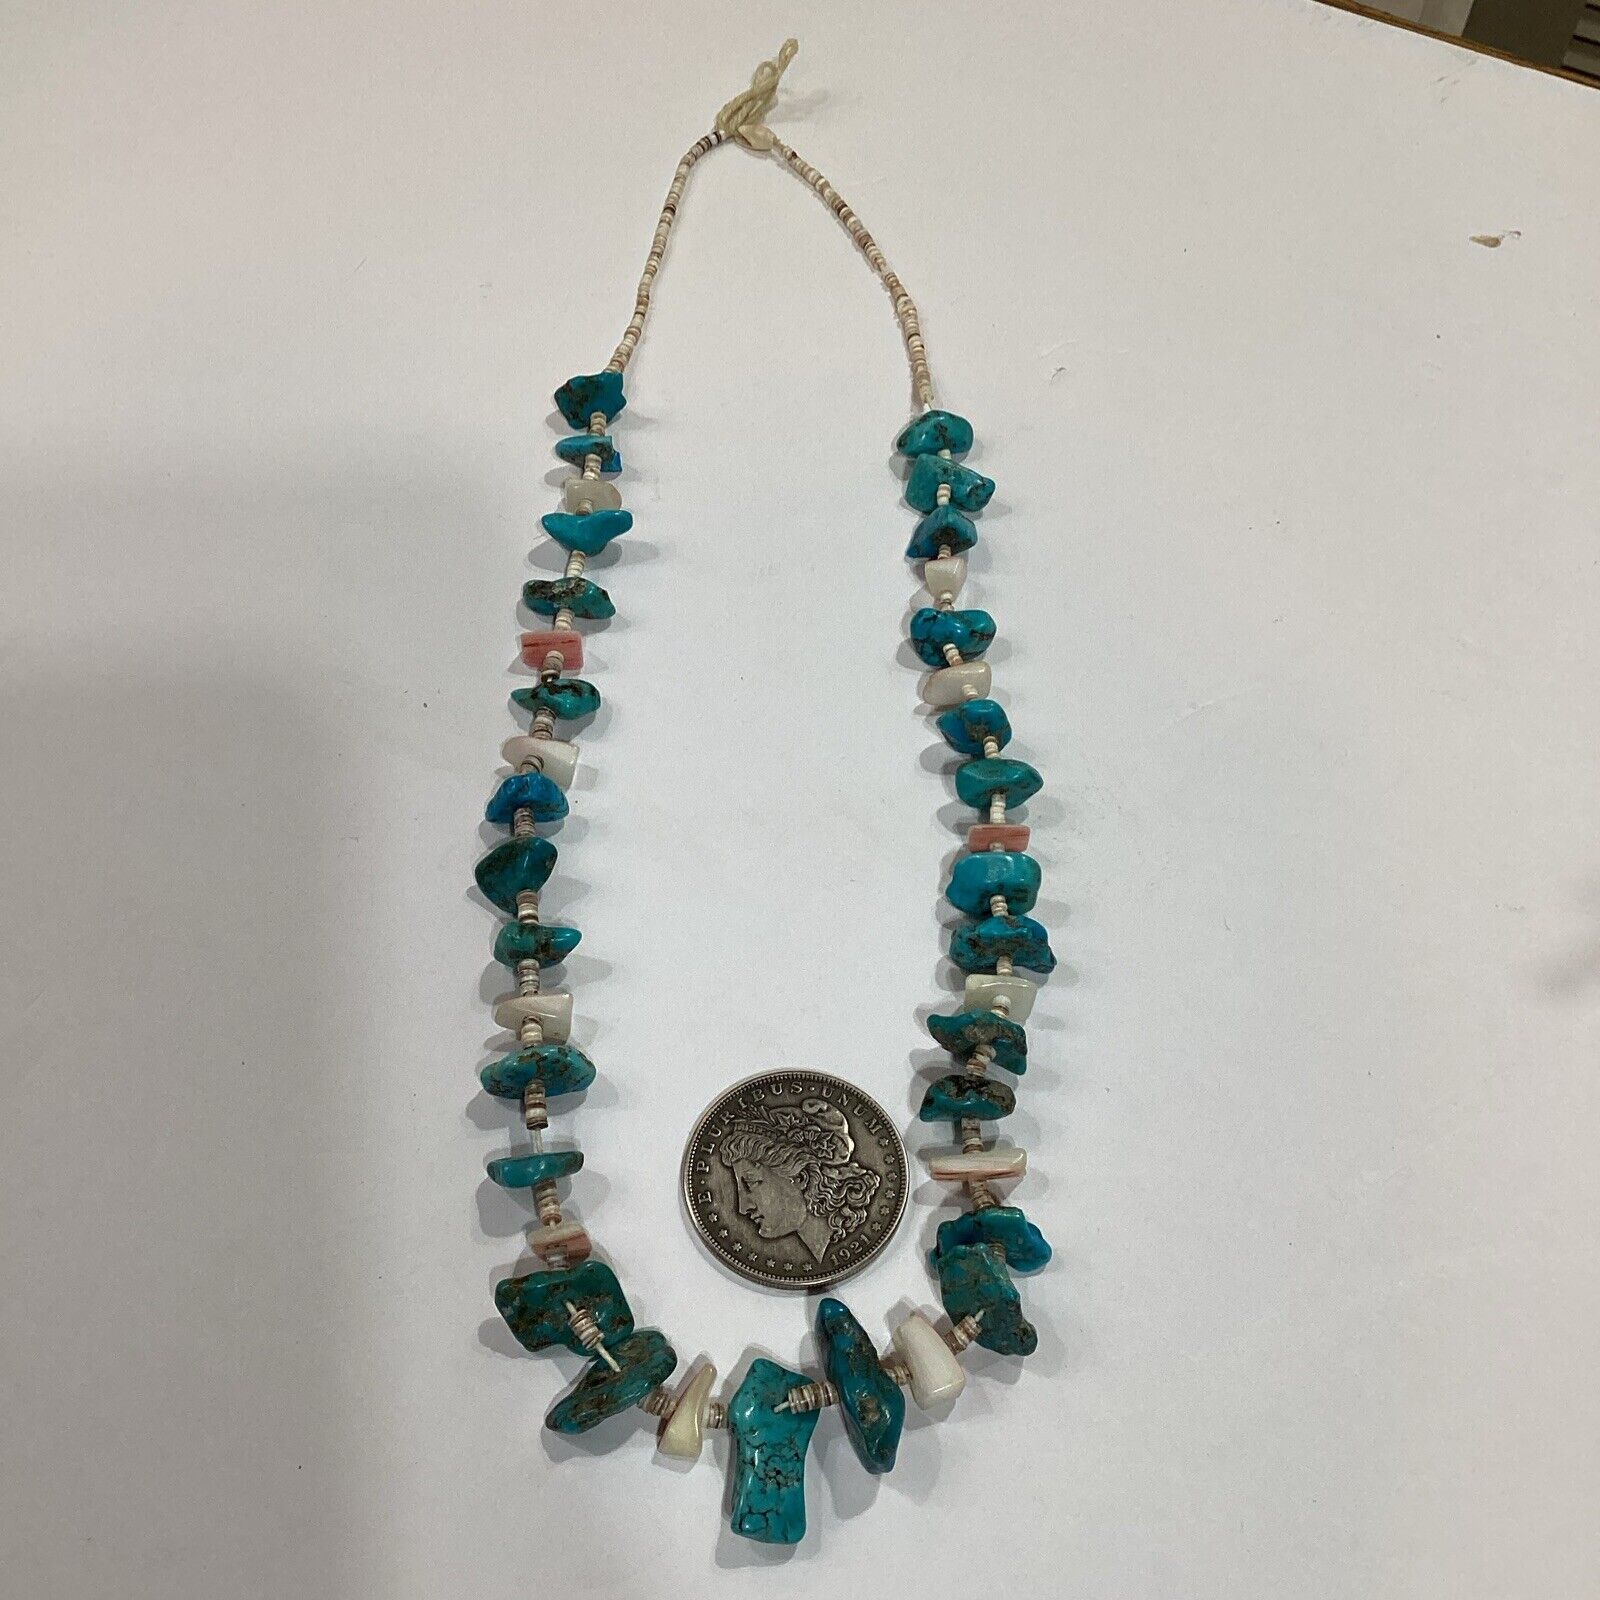 NATIVE AMERICAN OLD PAWN 14 INCH NUGGET TURQUOISE & SHELL NECKLACE 1980’s 69 g